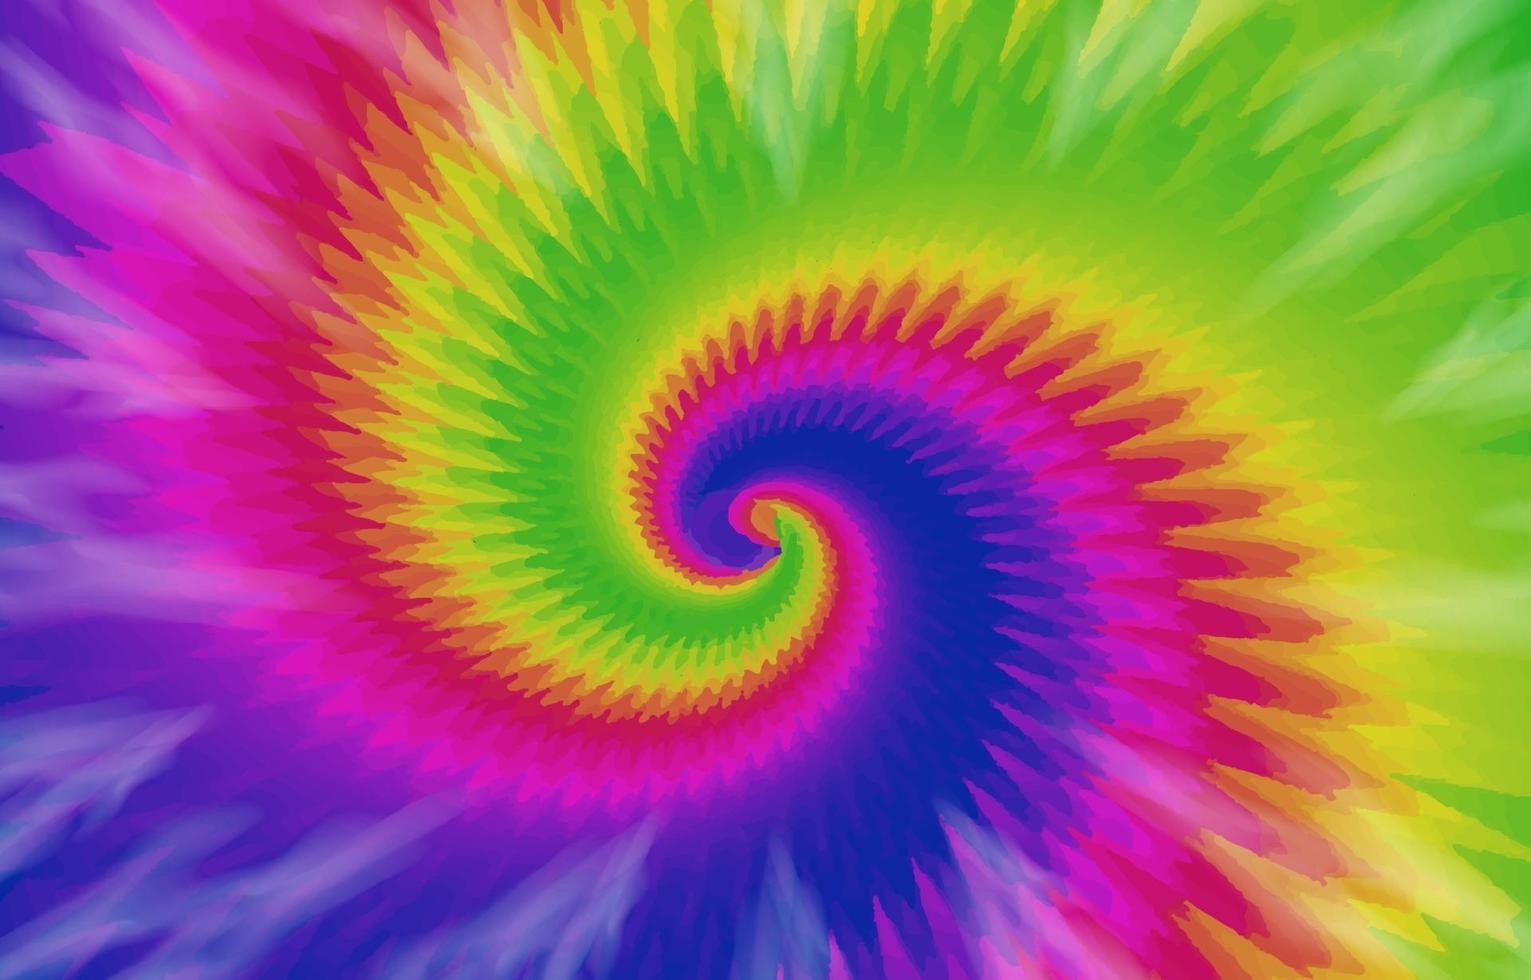 Colorful Spiral Tie Dye Background vector